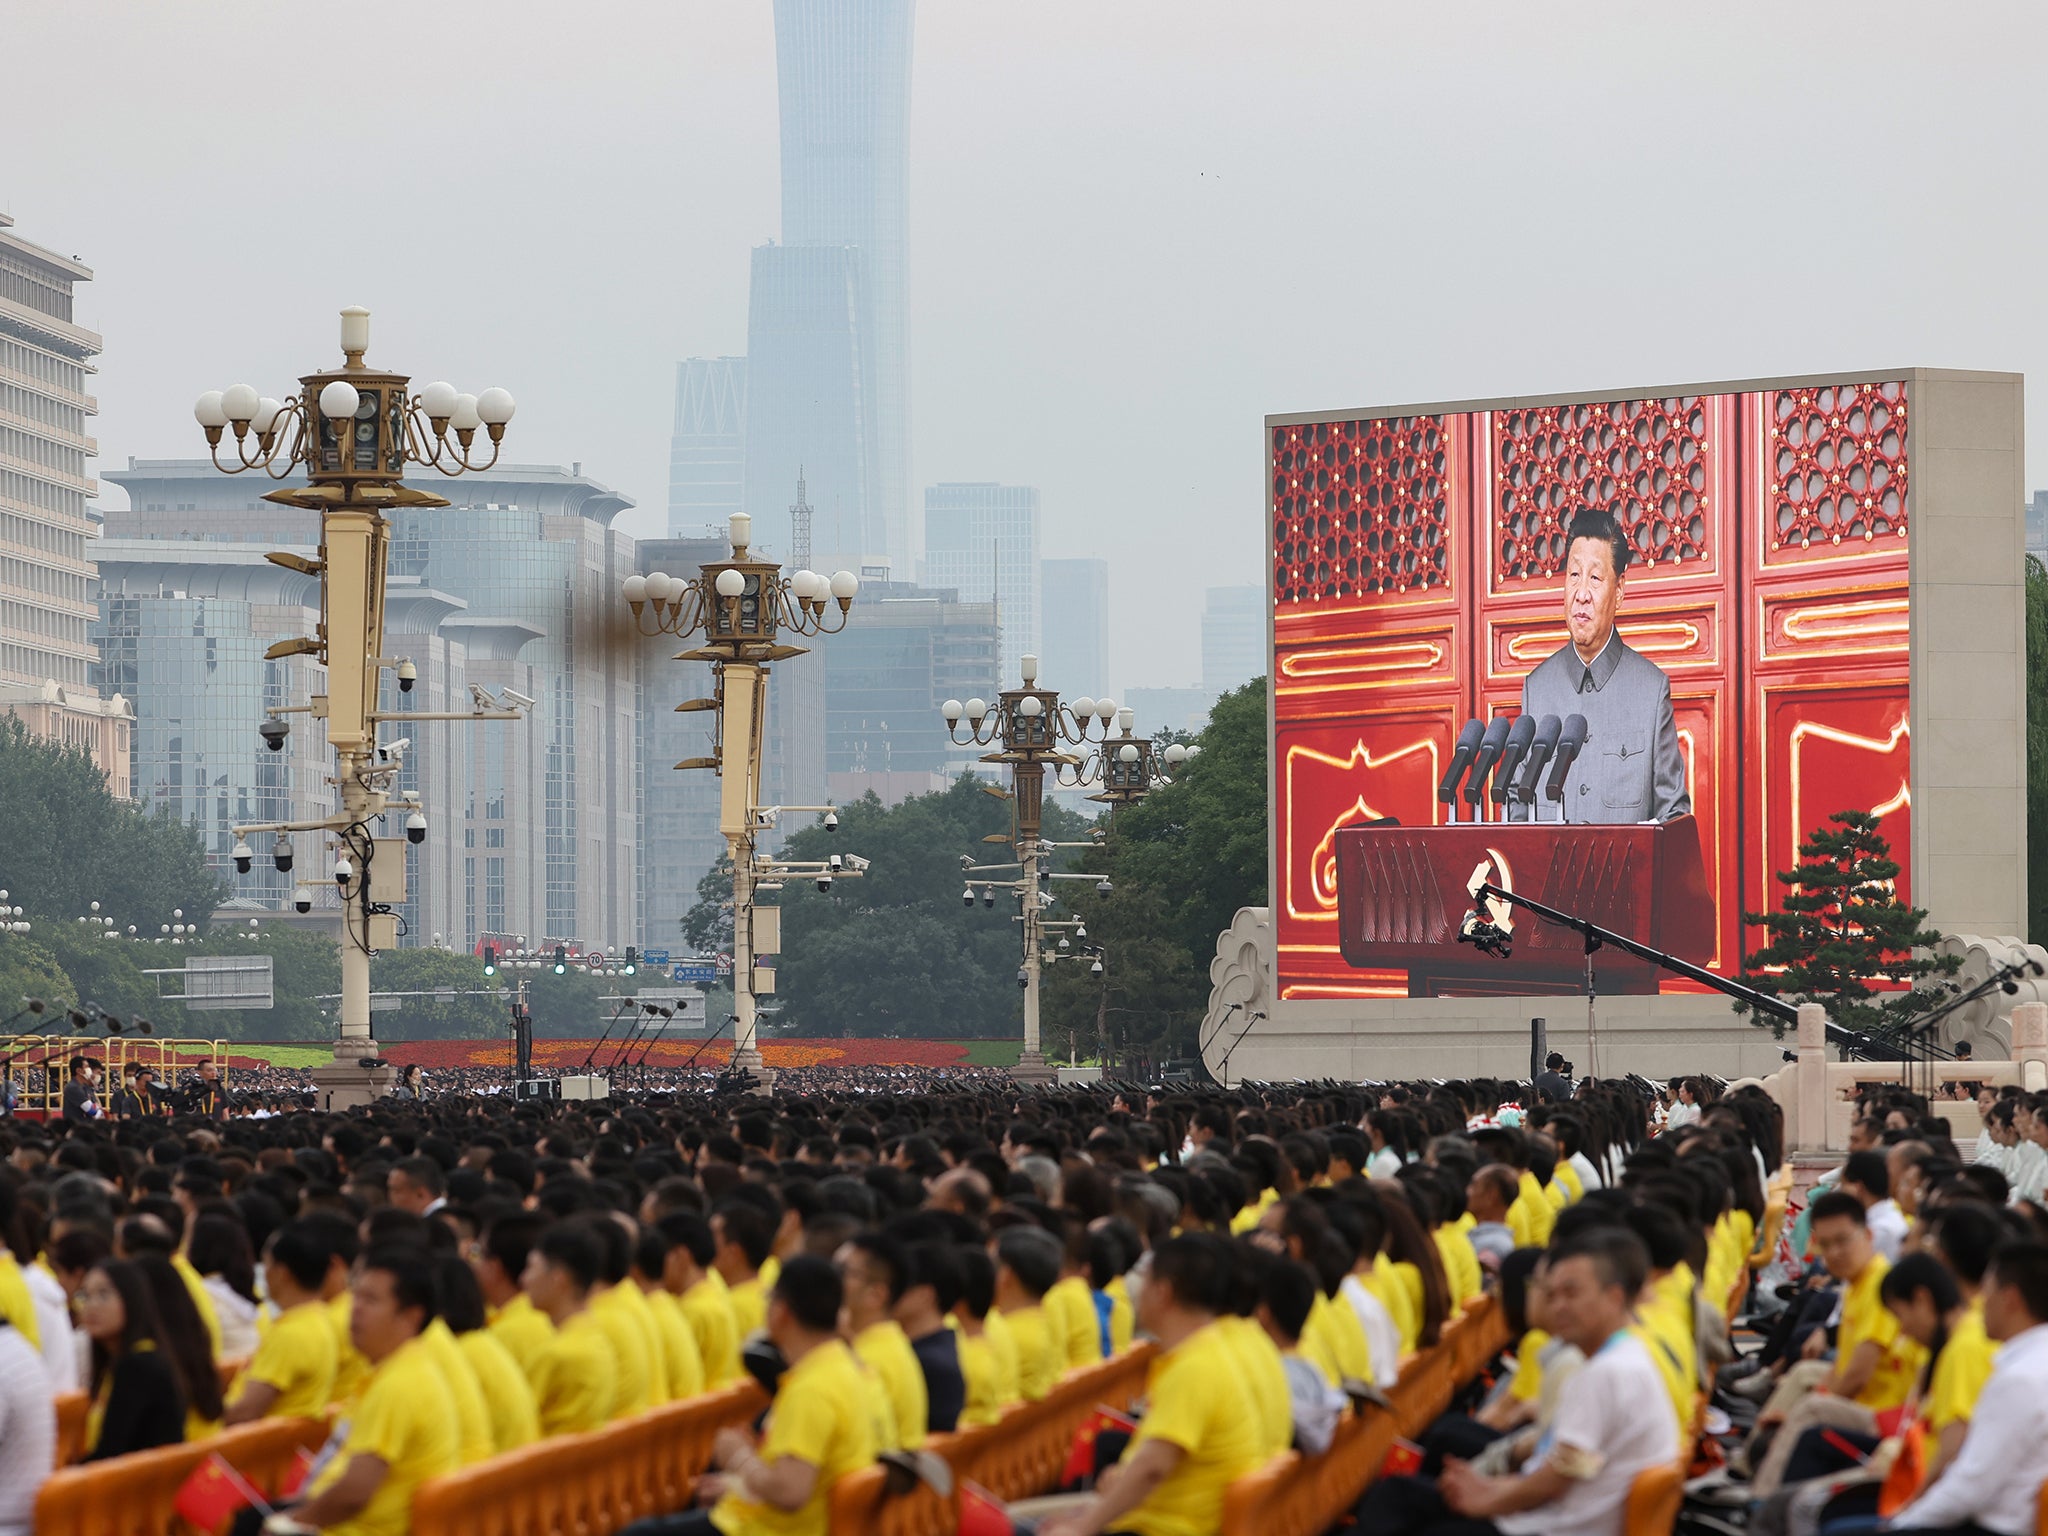 President Xi Jinping making a speech last month during the celebration of the 100th anniversary of the founding of the Chinese Communist Party